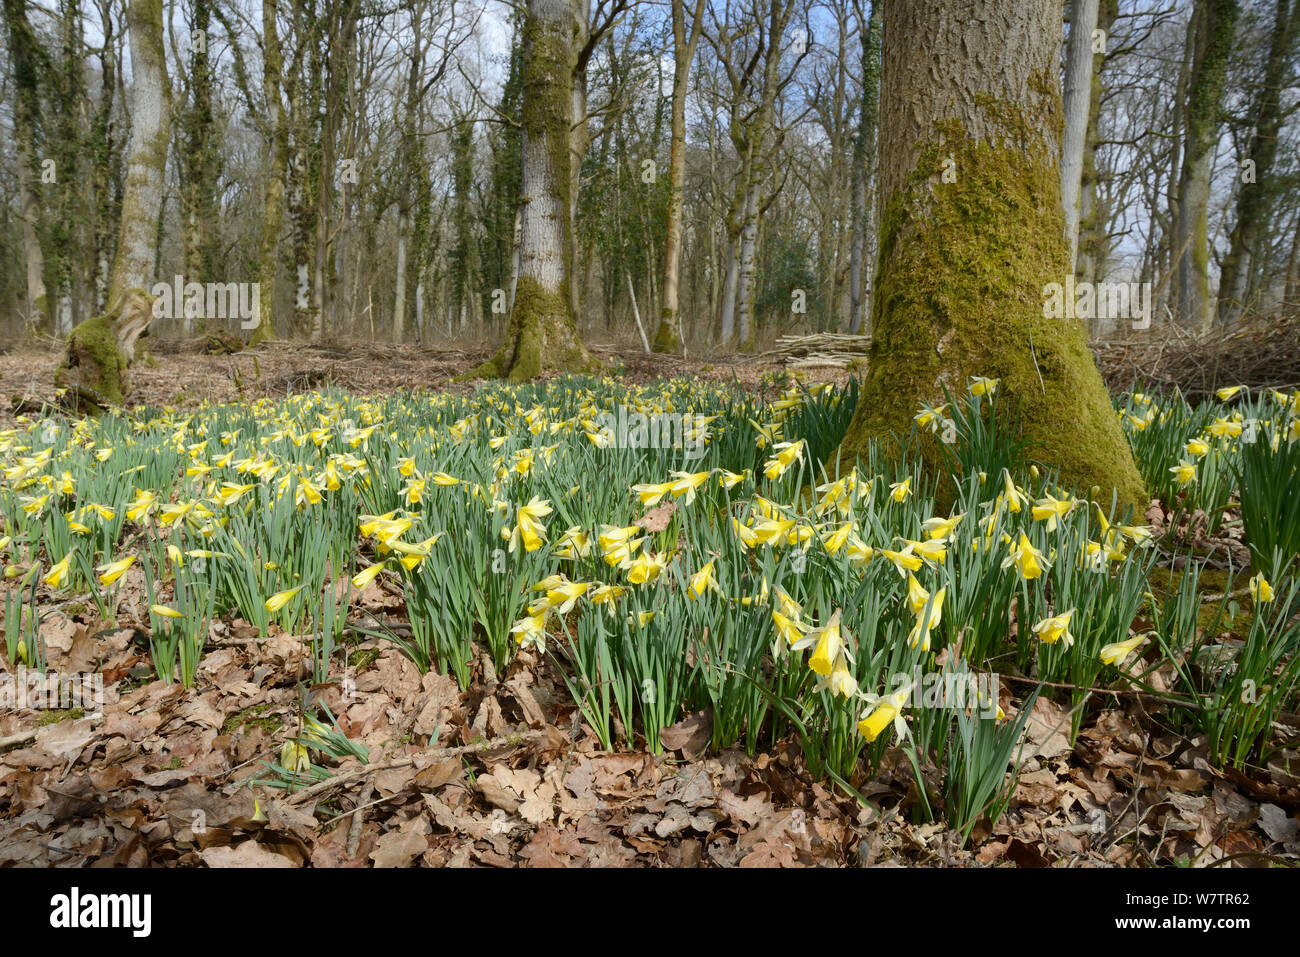 Carpet of Wild daffodils / Lent lilies (Narcissus pseudonarcissus) flowering in coppiced woodland, Lower woods, Gloucestershire, UK, March. Stock Photo